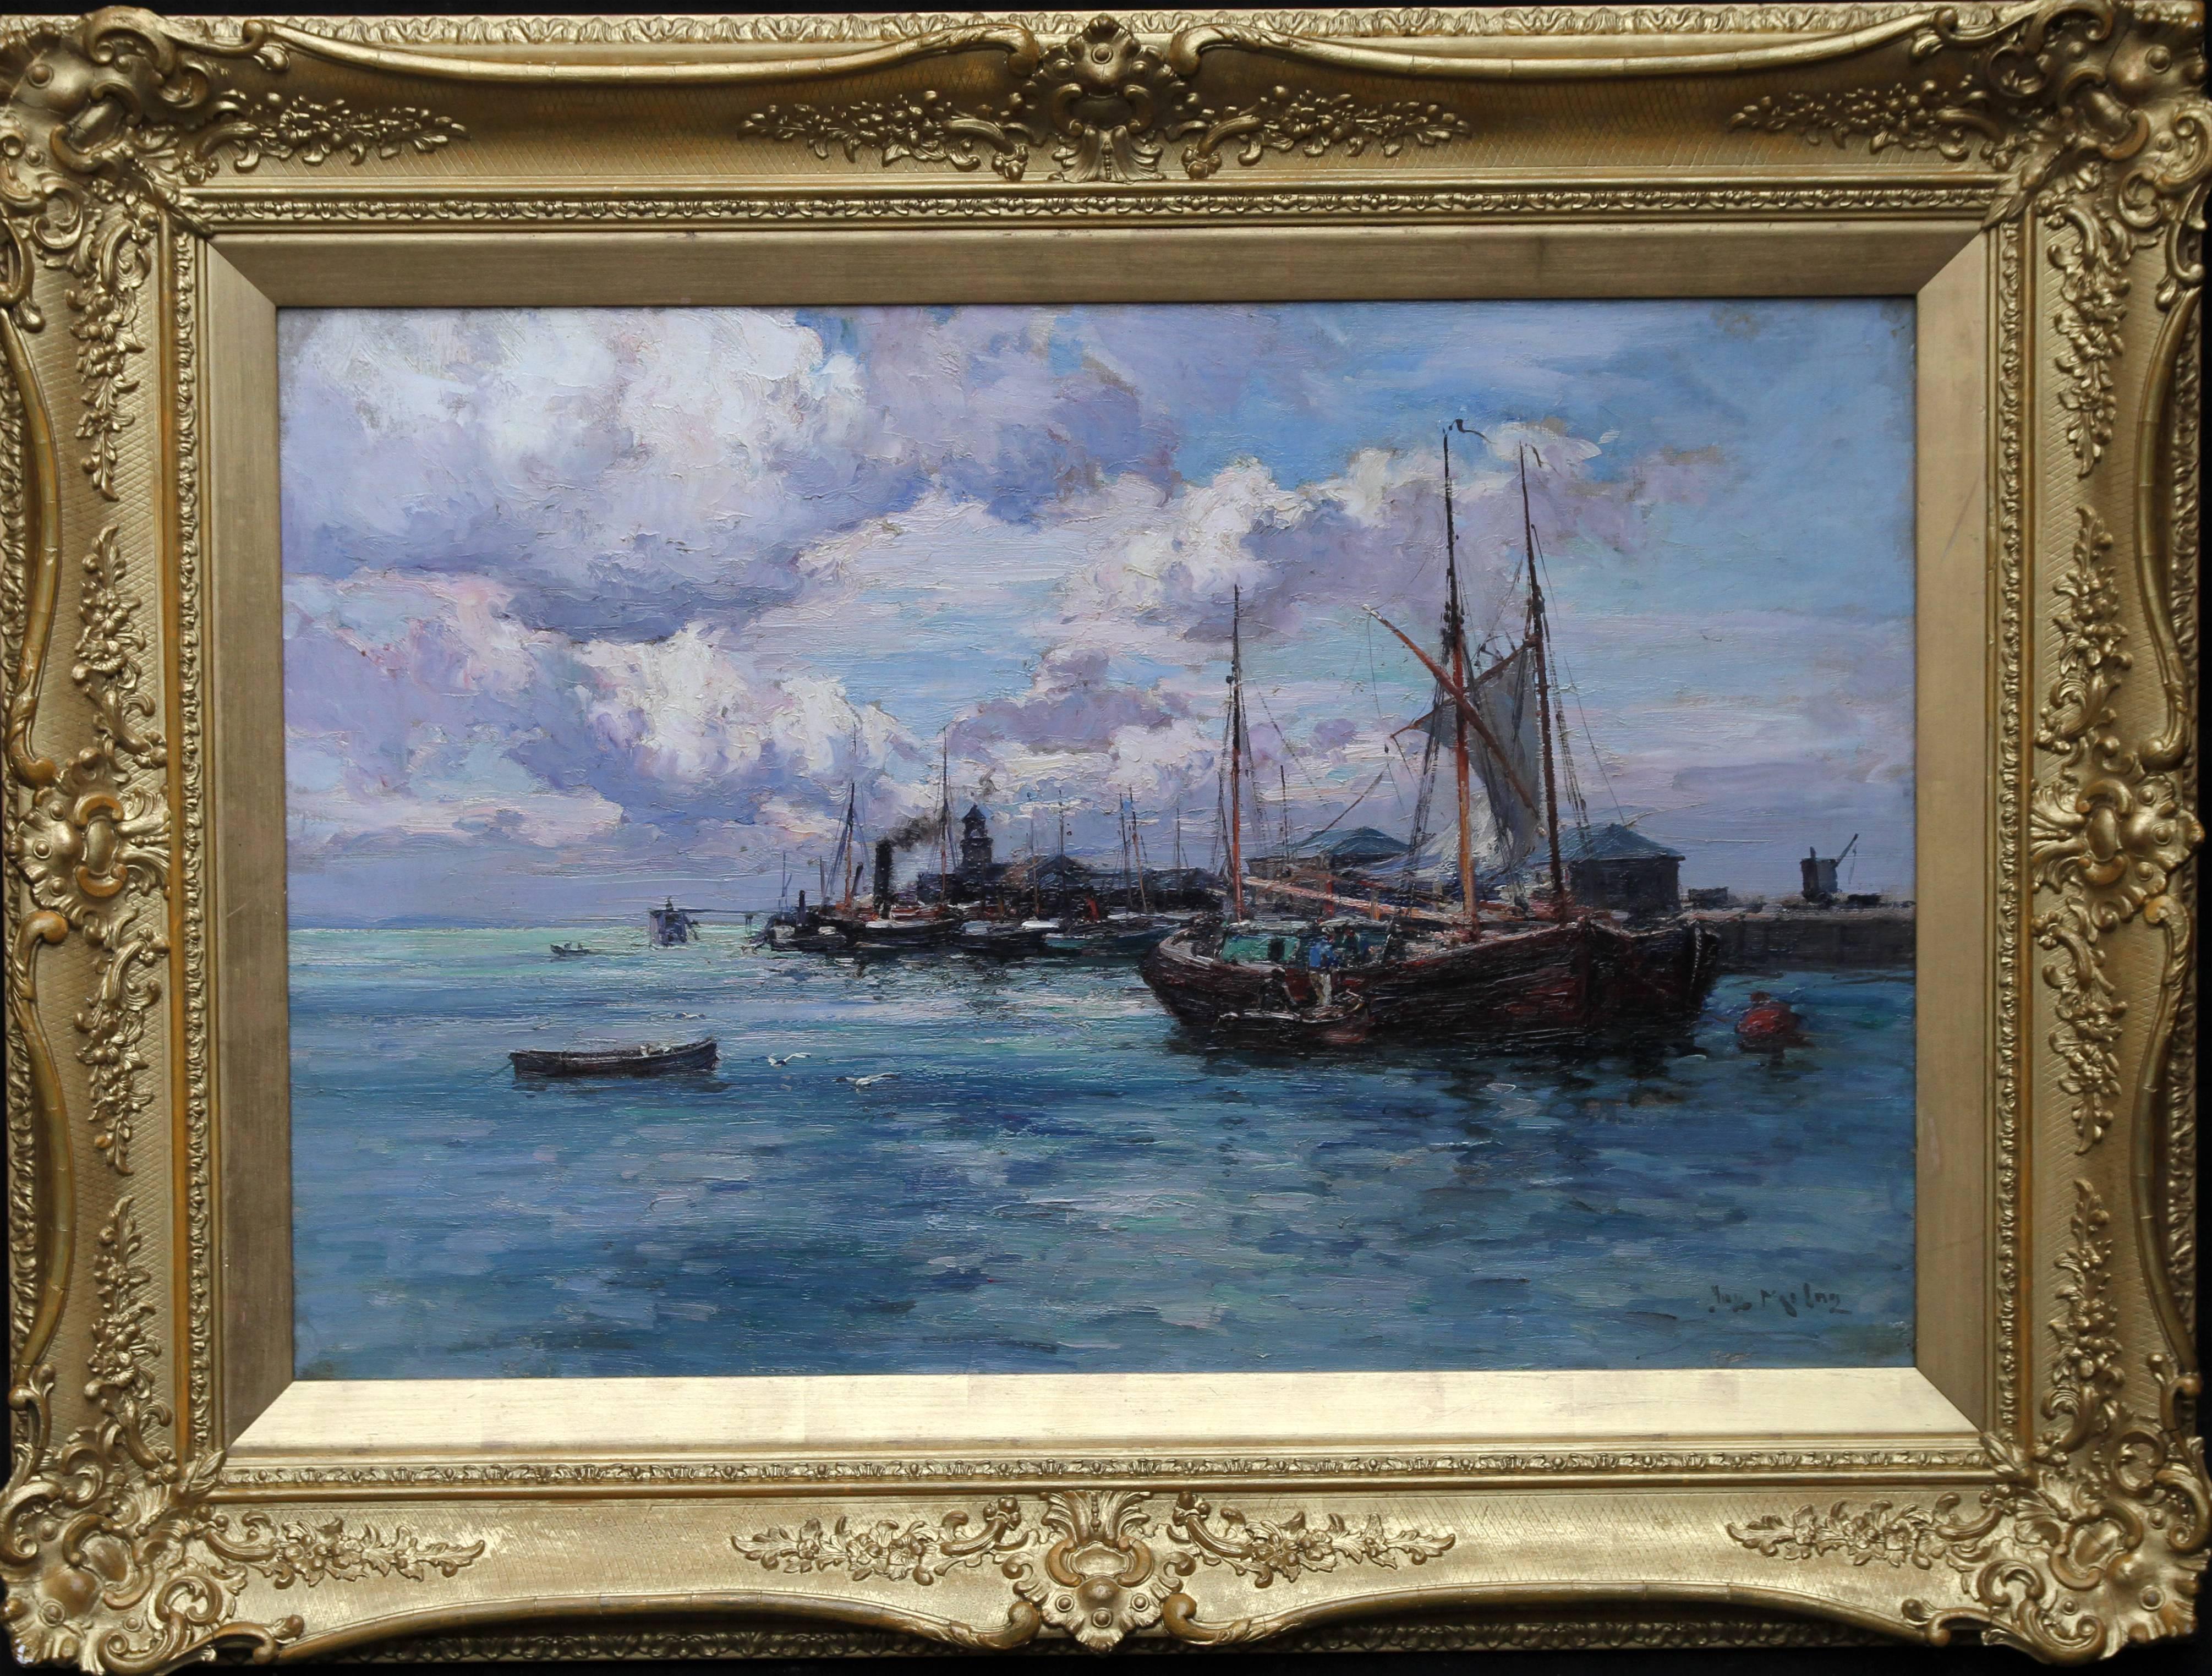 Boats at Harbour - Scottish art Victorian Impressionist oil painting seascape 4